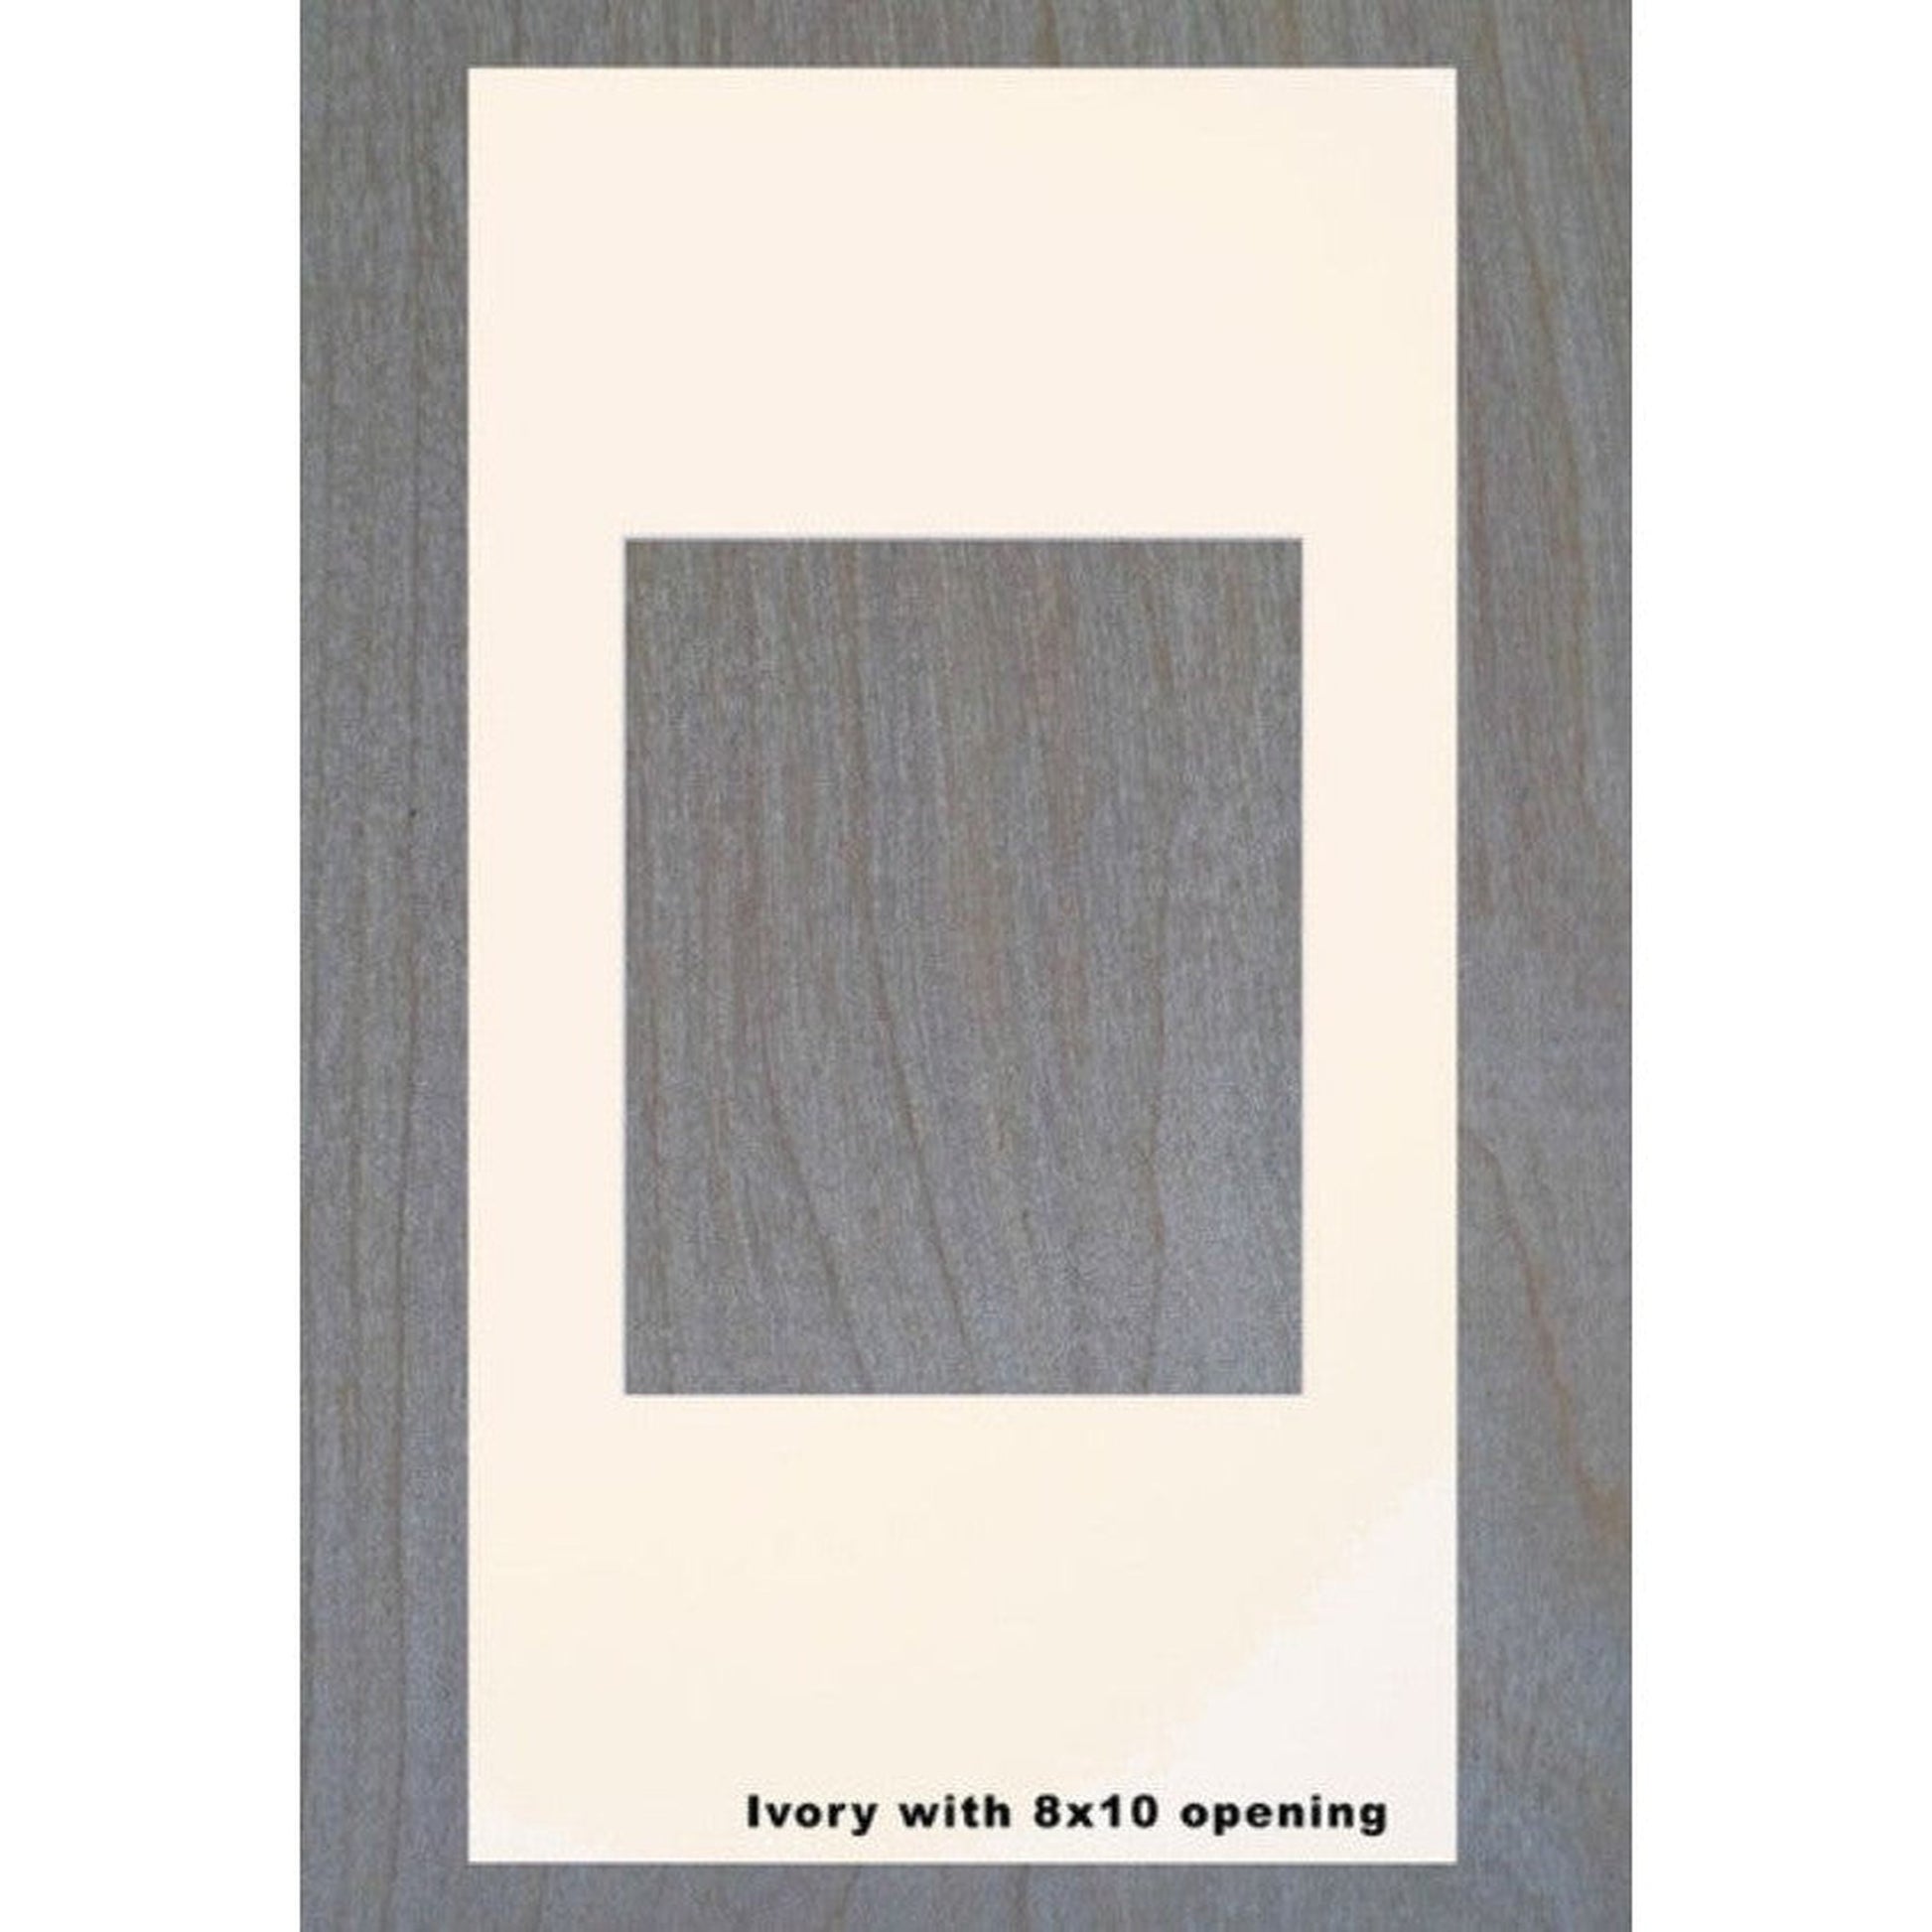 Fox Hollow Furnishings 14" x 16" Black Regular Standard 3.75" Depth Recessed Picture Frame Medicine Cabinet With Ivory 8" x 10" Opening